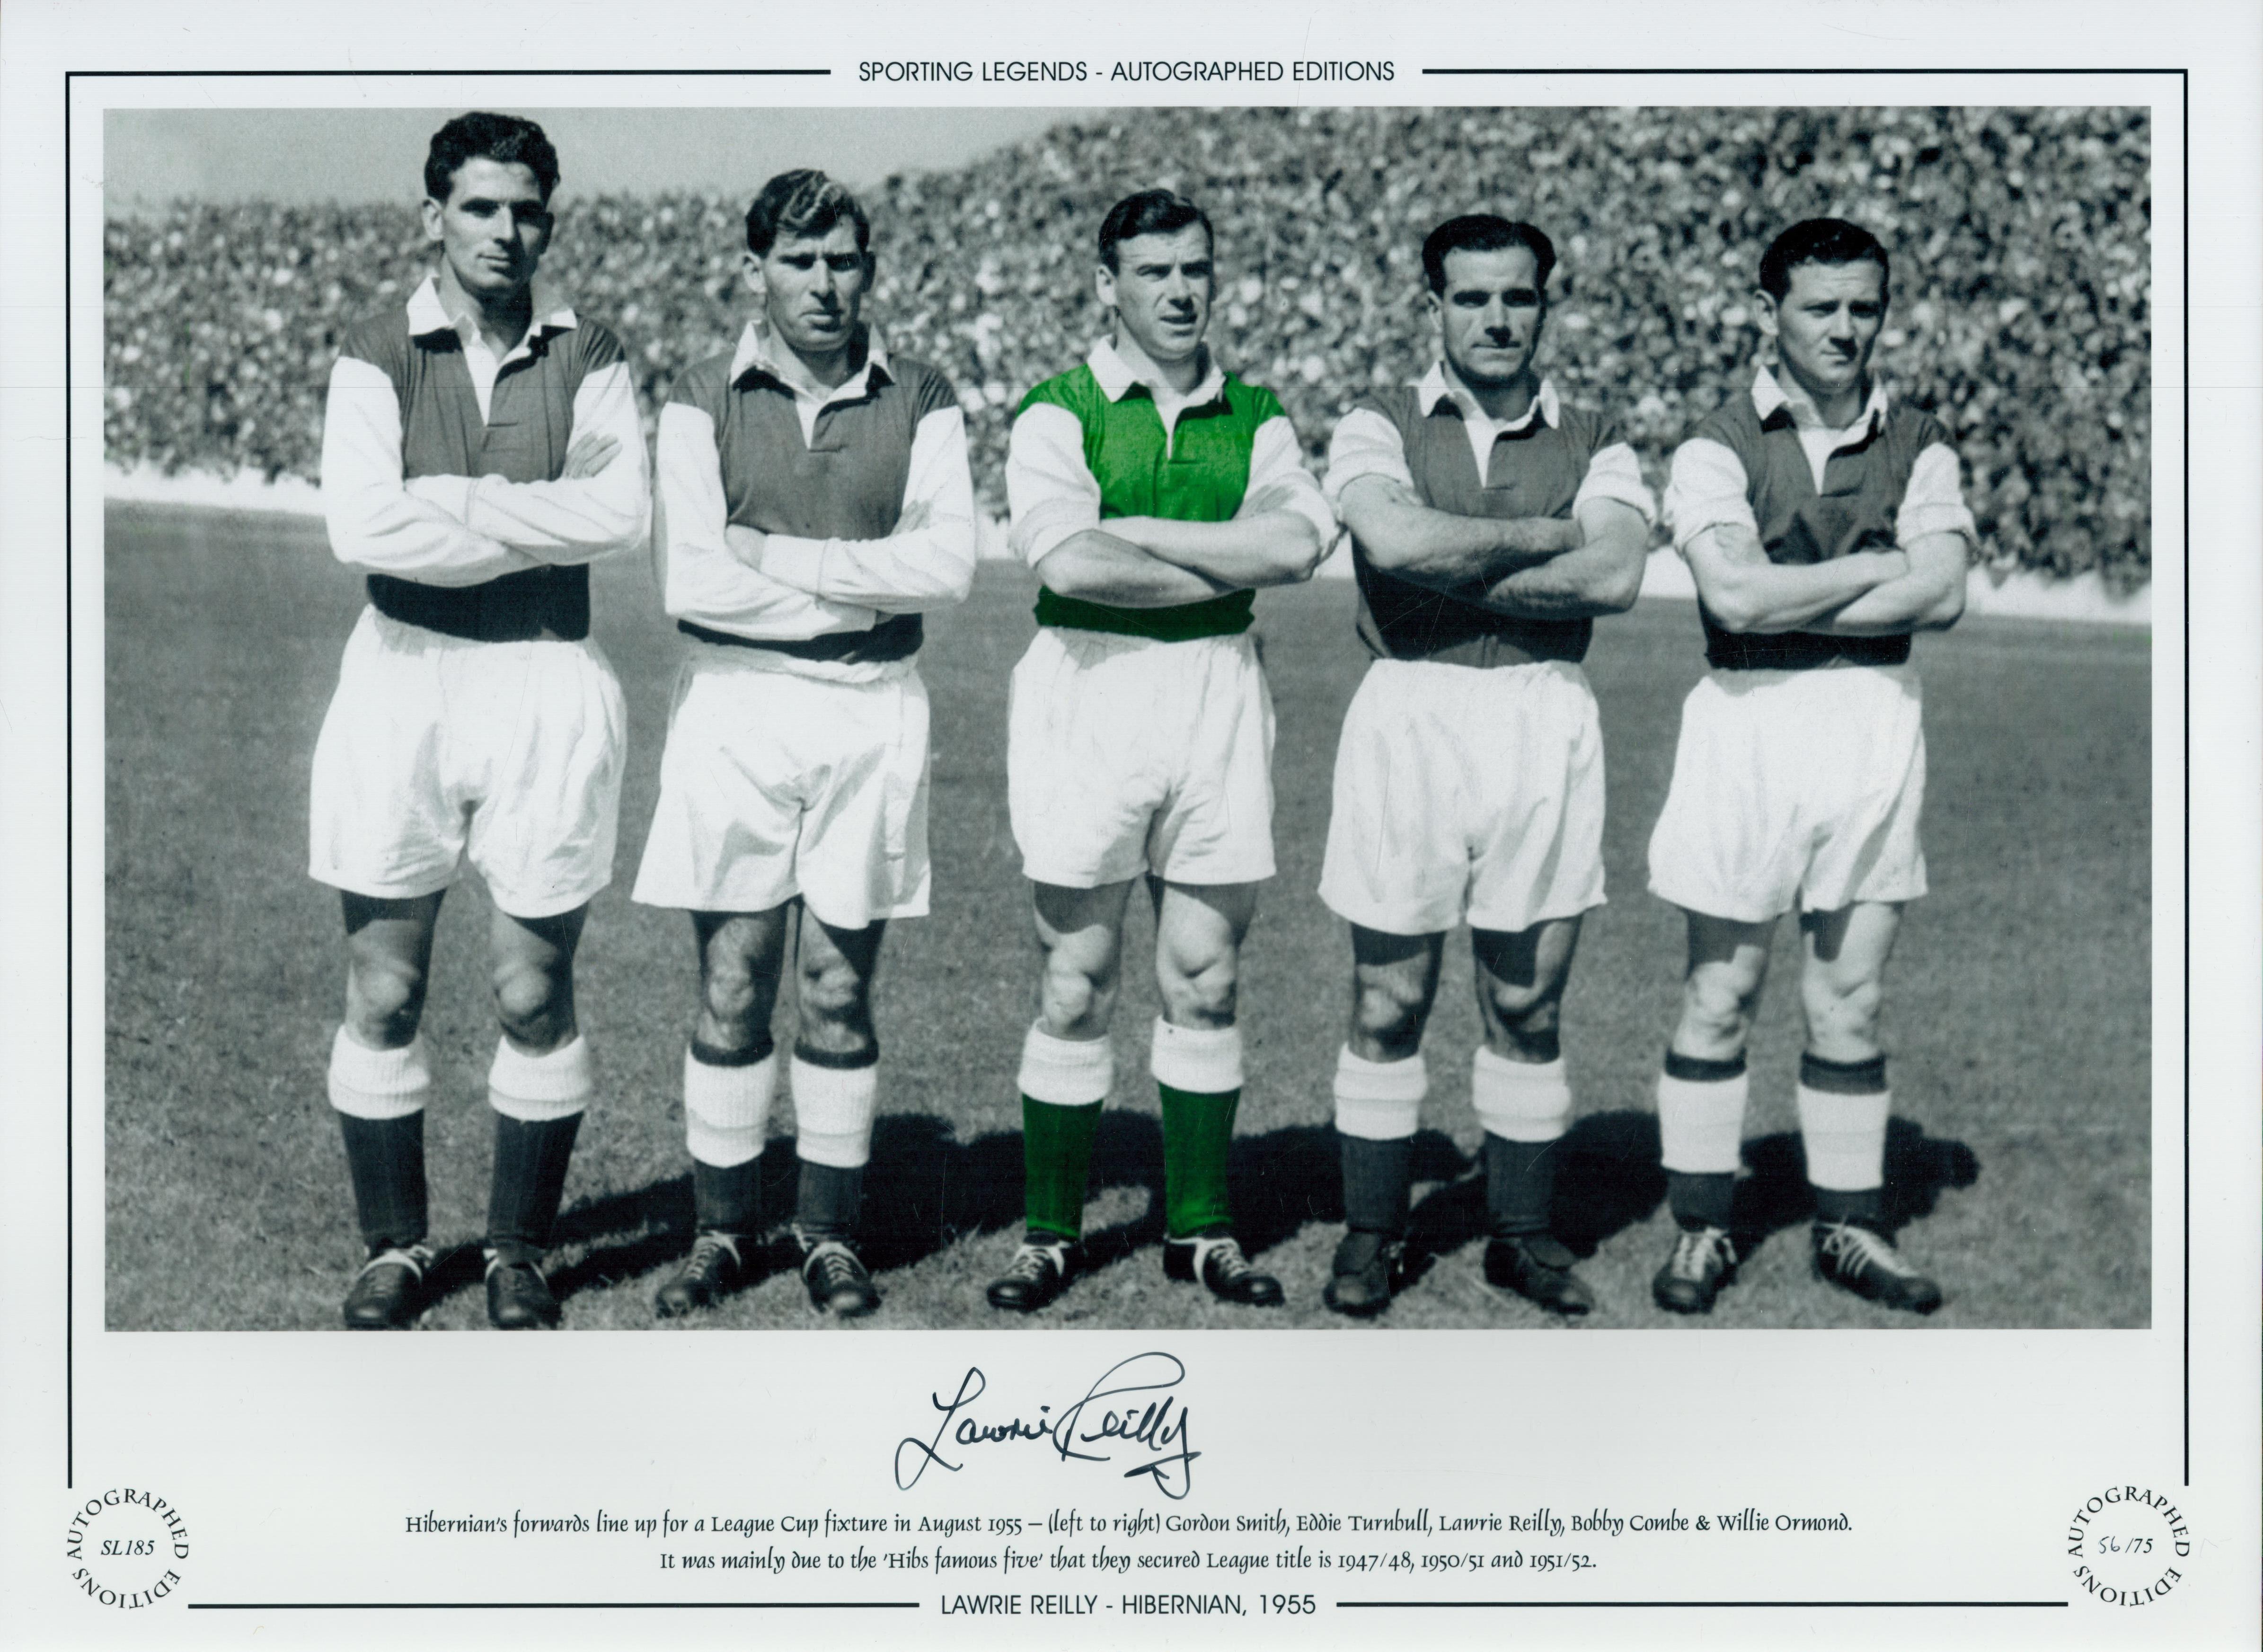 Autographed LAWRIE REILLY 16 x 12 Limited Edition : Colorized, depicting Hibernian's forward